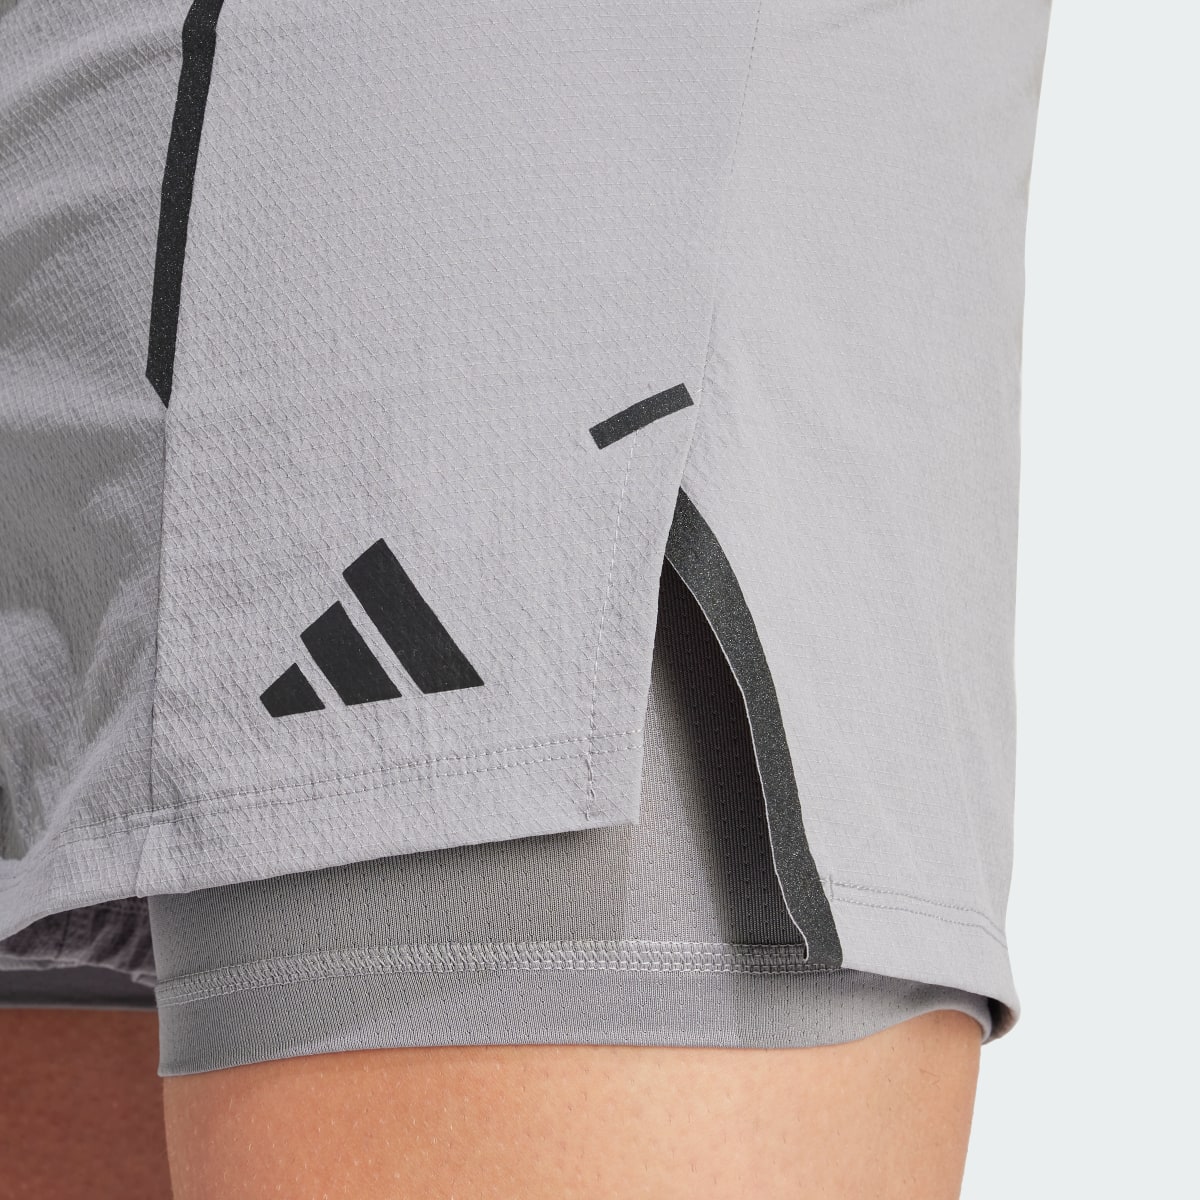 Adidas Designed for Training Pro Series Adistrong Workout Shorts. 6